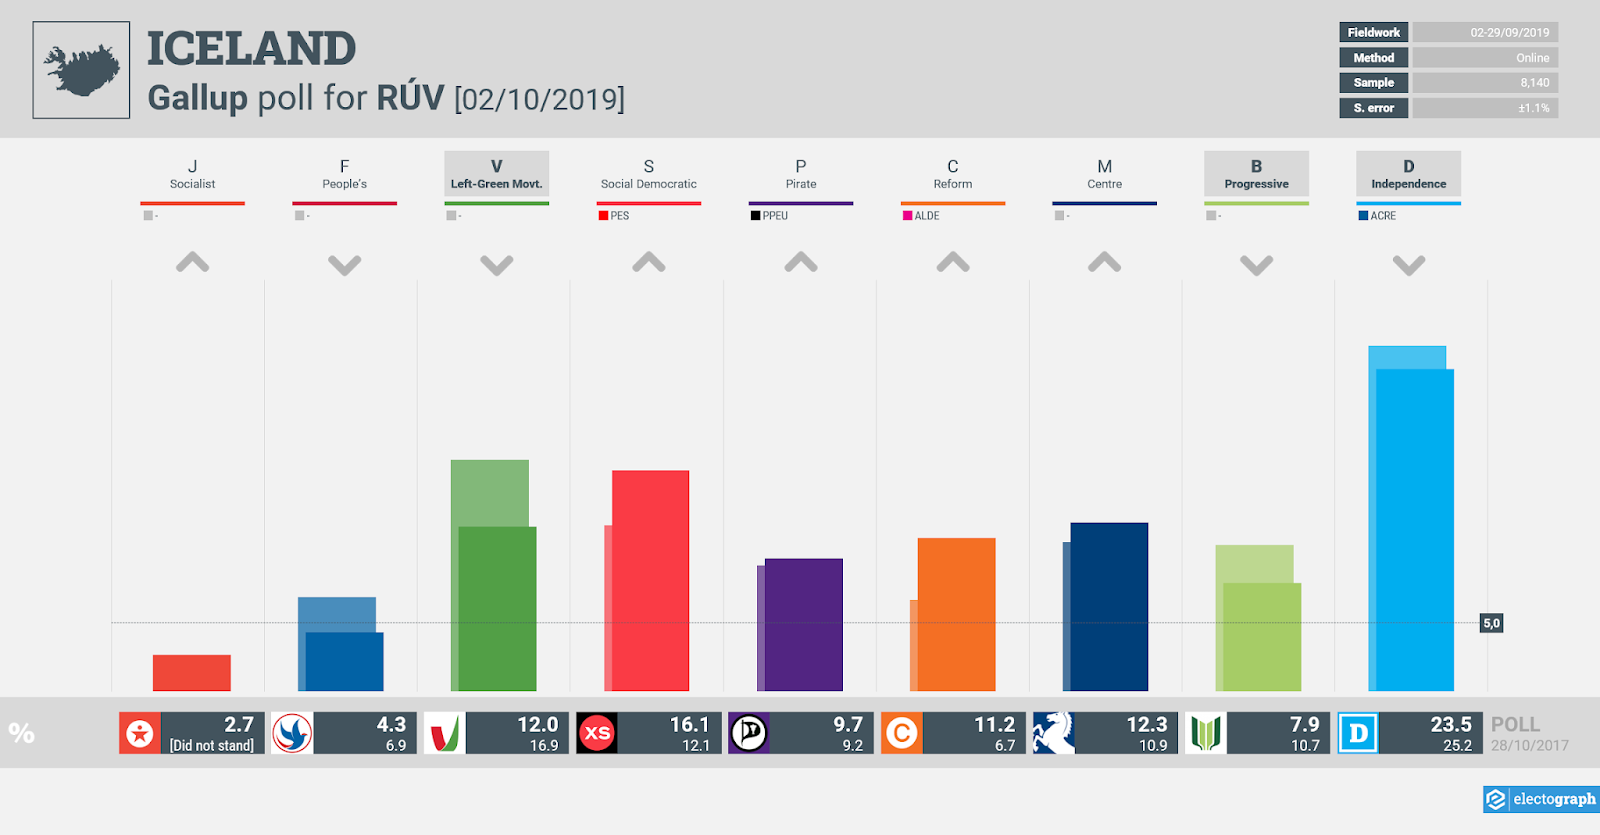 ICELAND: Gallup poll chart for RÚV, 2 October 2019